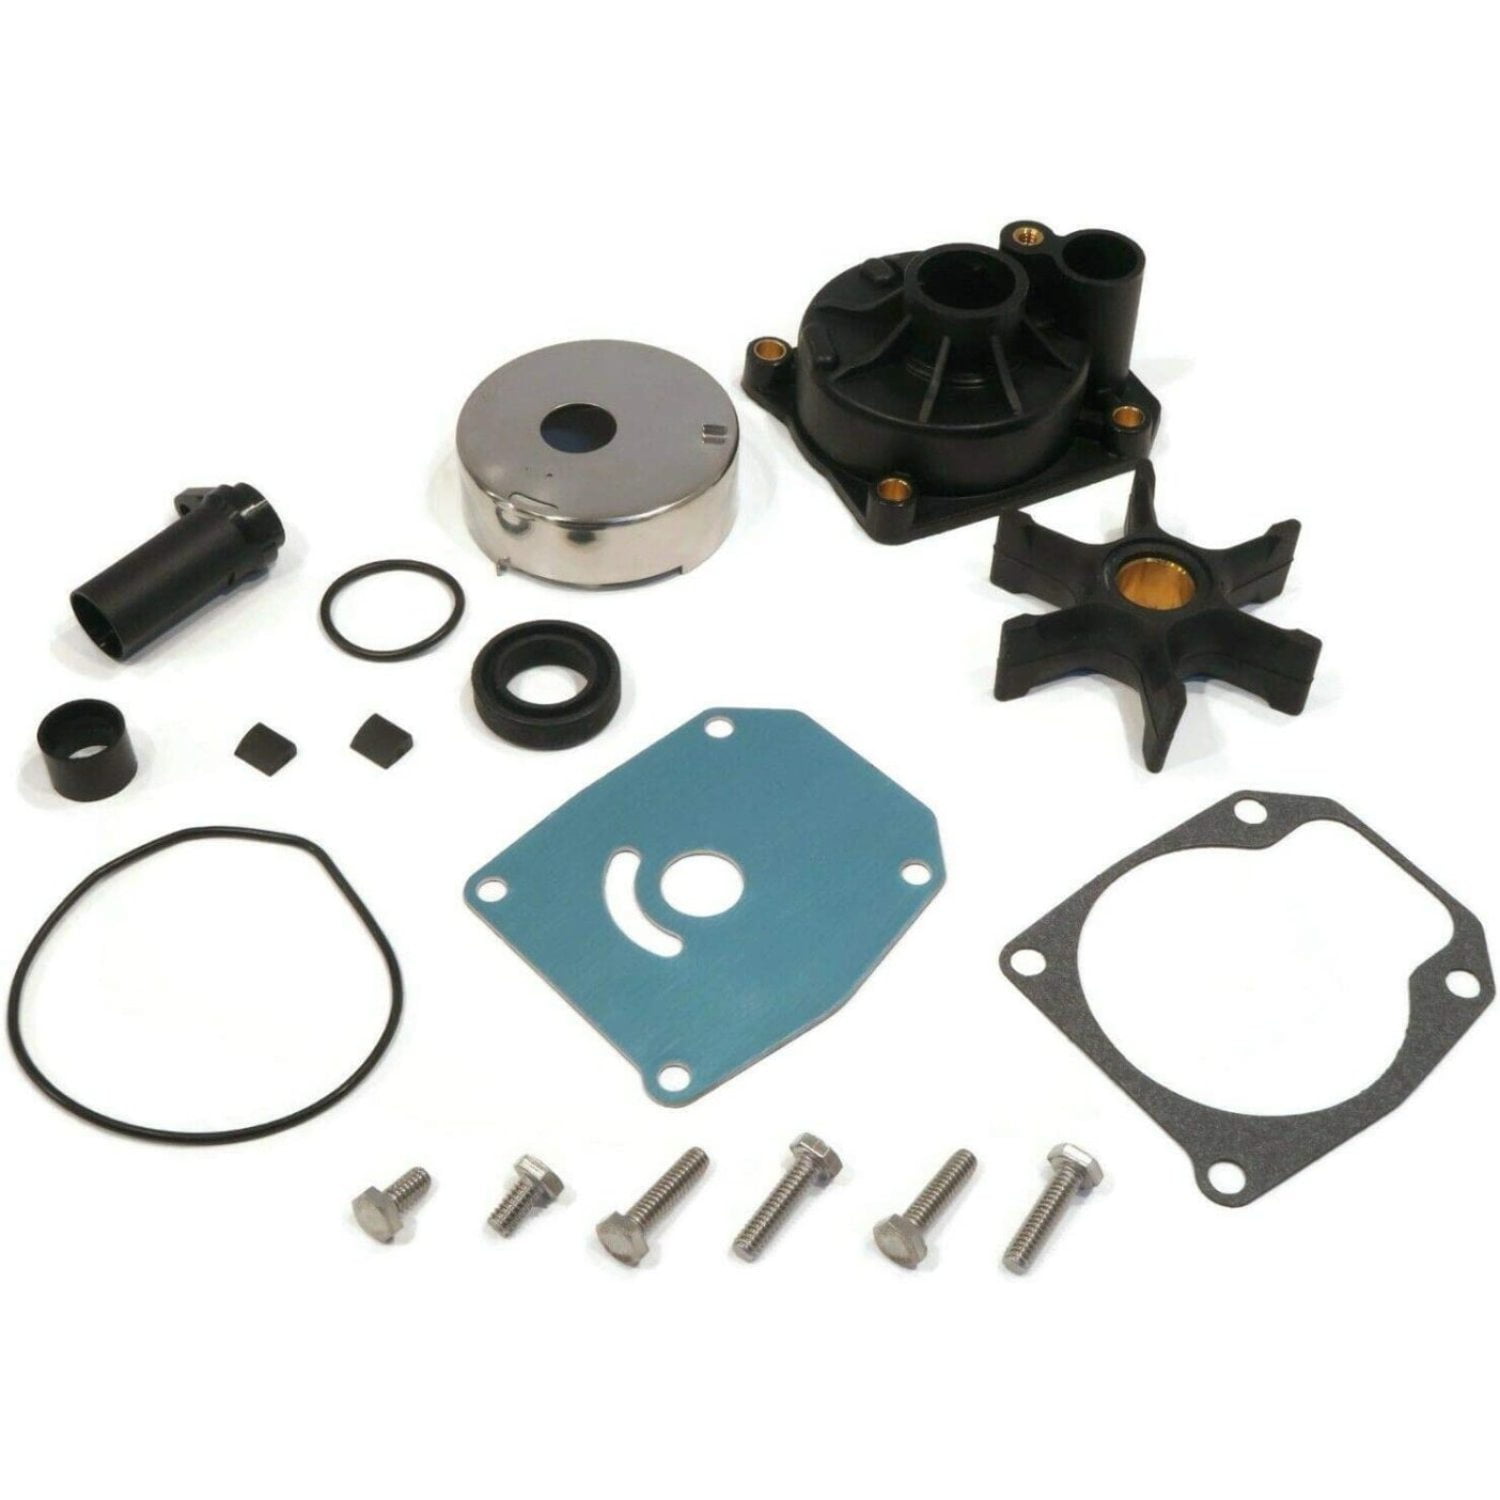 Evinrude Johnson Water Pump Kit 0438602 60 65 70 75 HP 2 Stroke and 60-70 HP 4 Stroke SEI MARINE PRODUCTS 